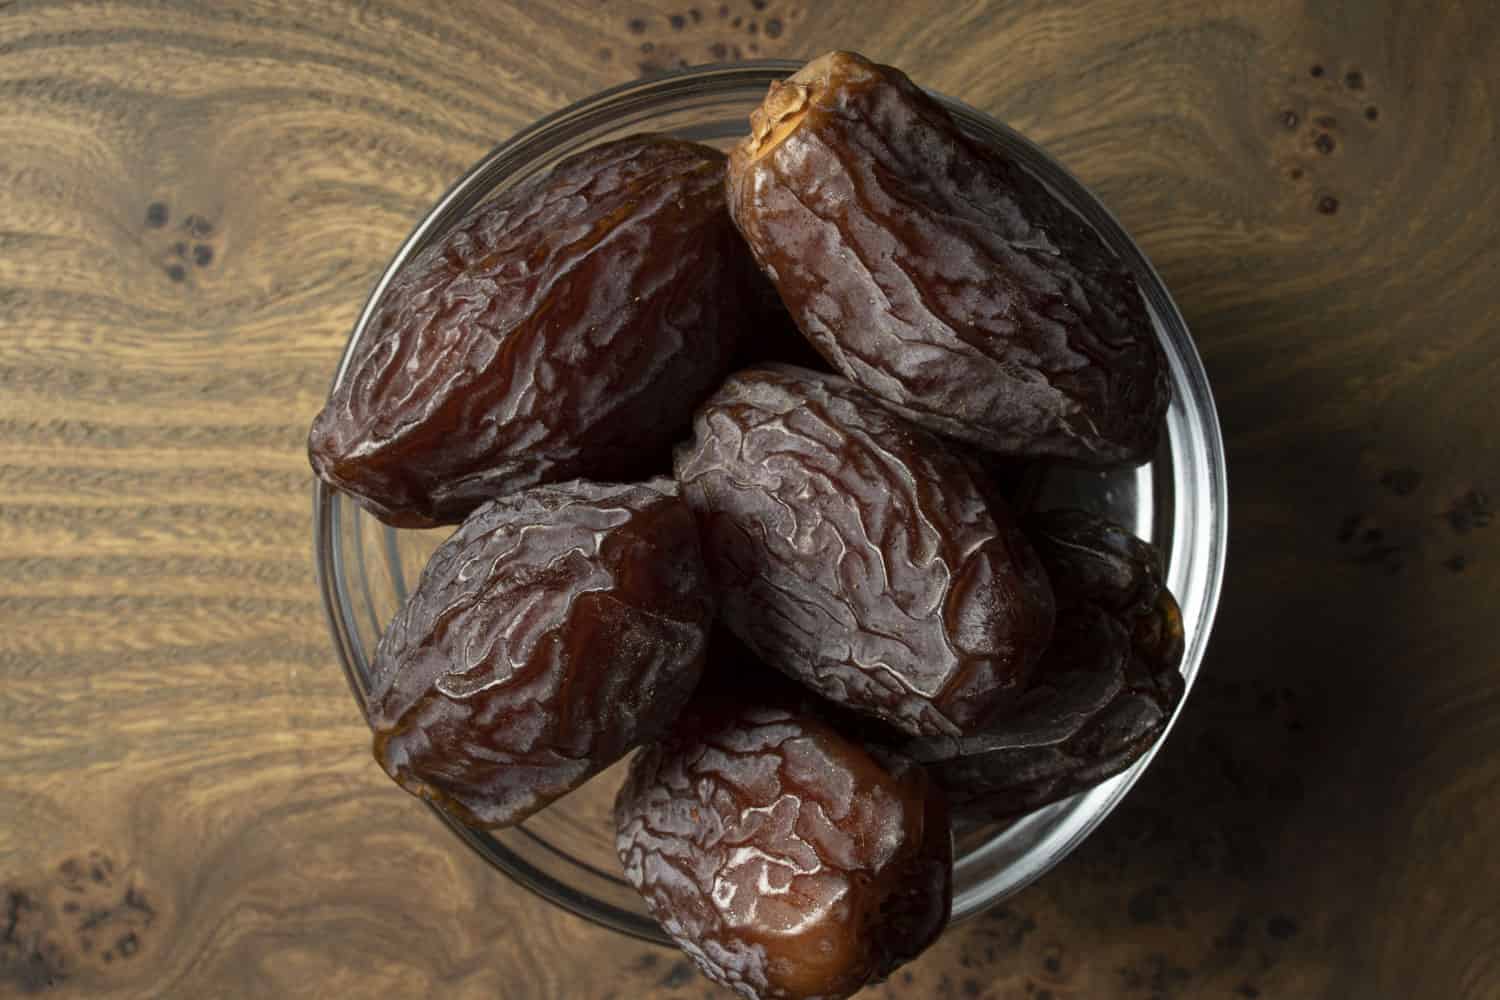 Best dates for sale